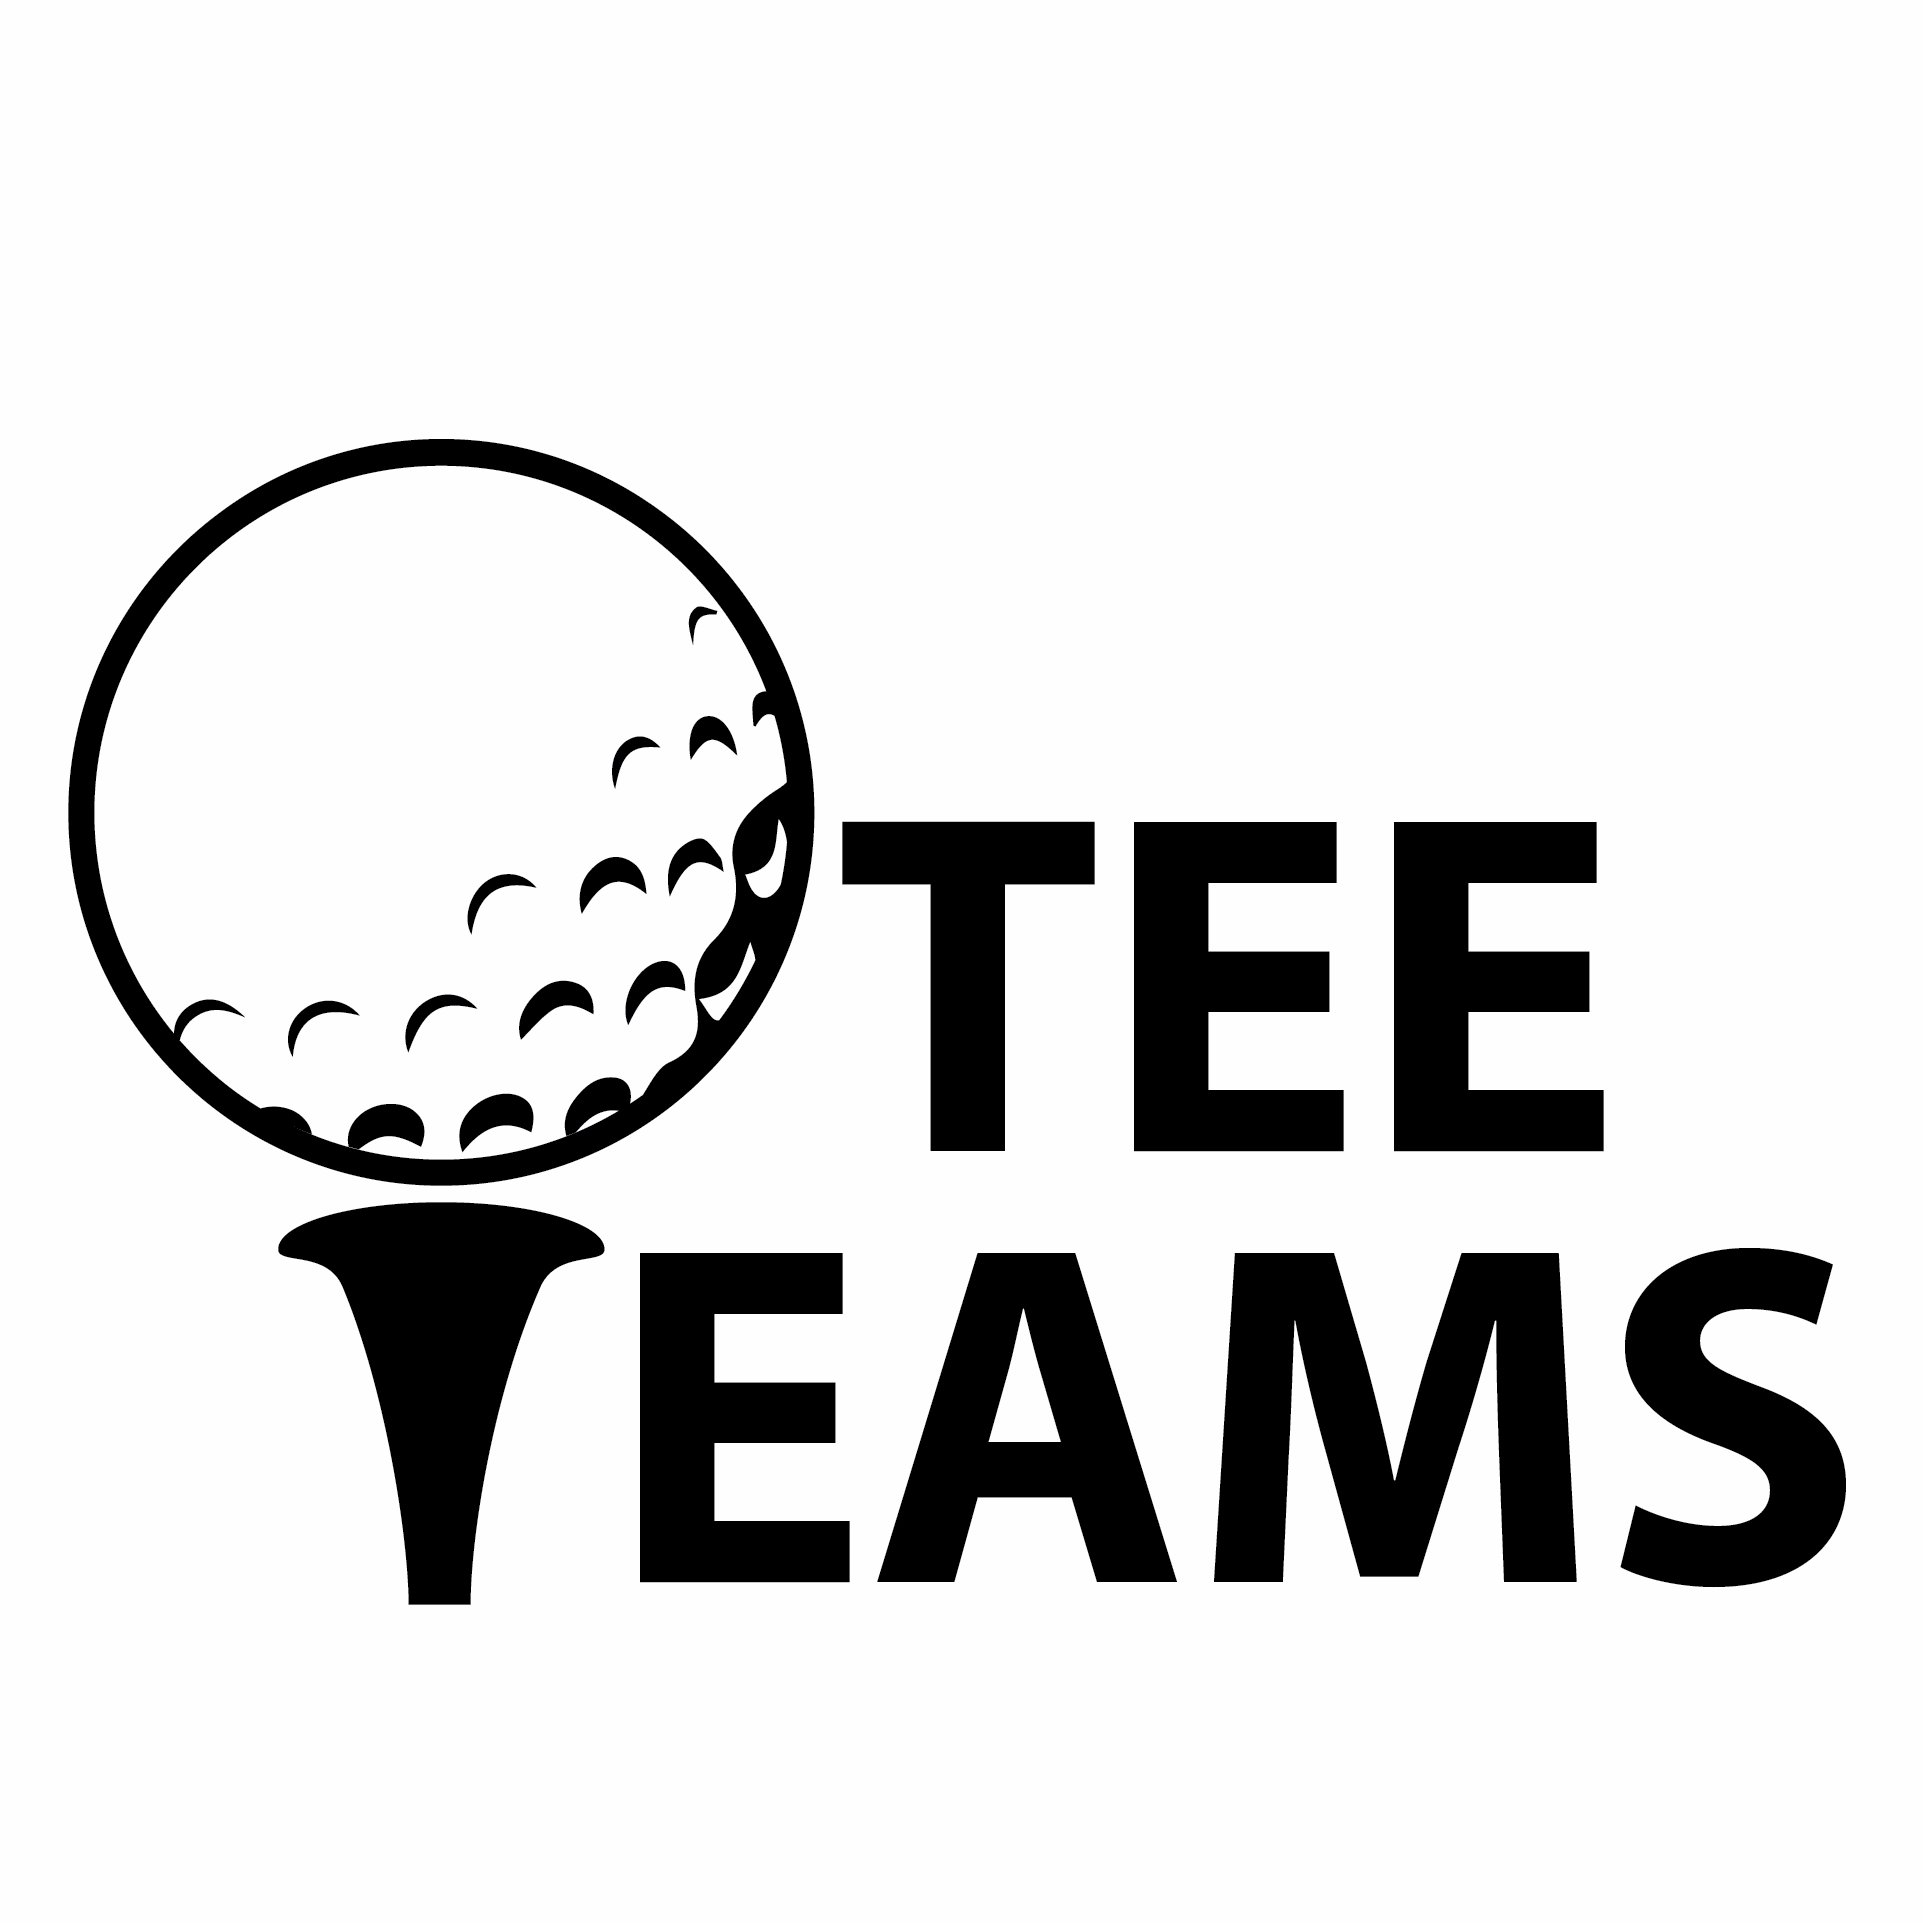 Introducing the first ever 2-on-2 golf league hosted online. Launching in Cincinnati Spring 2017.
Coming to your city soon. https://t.co/OCmorwGJZy